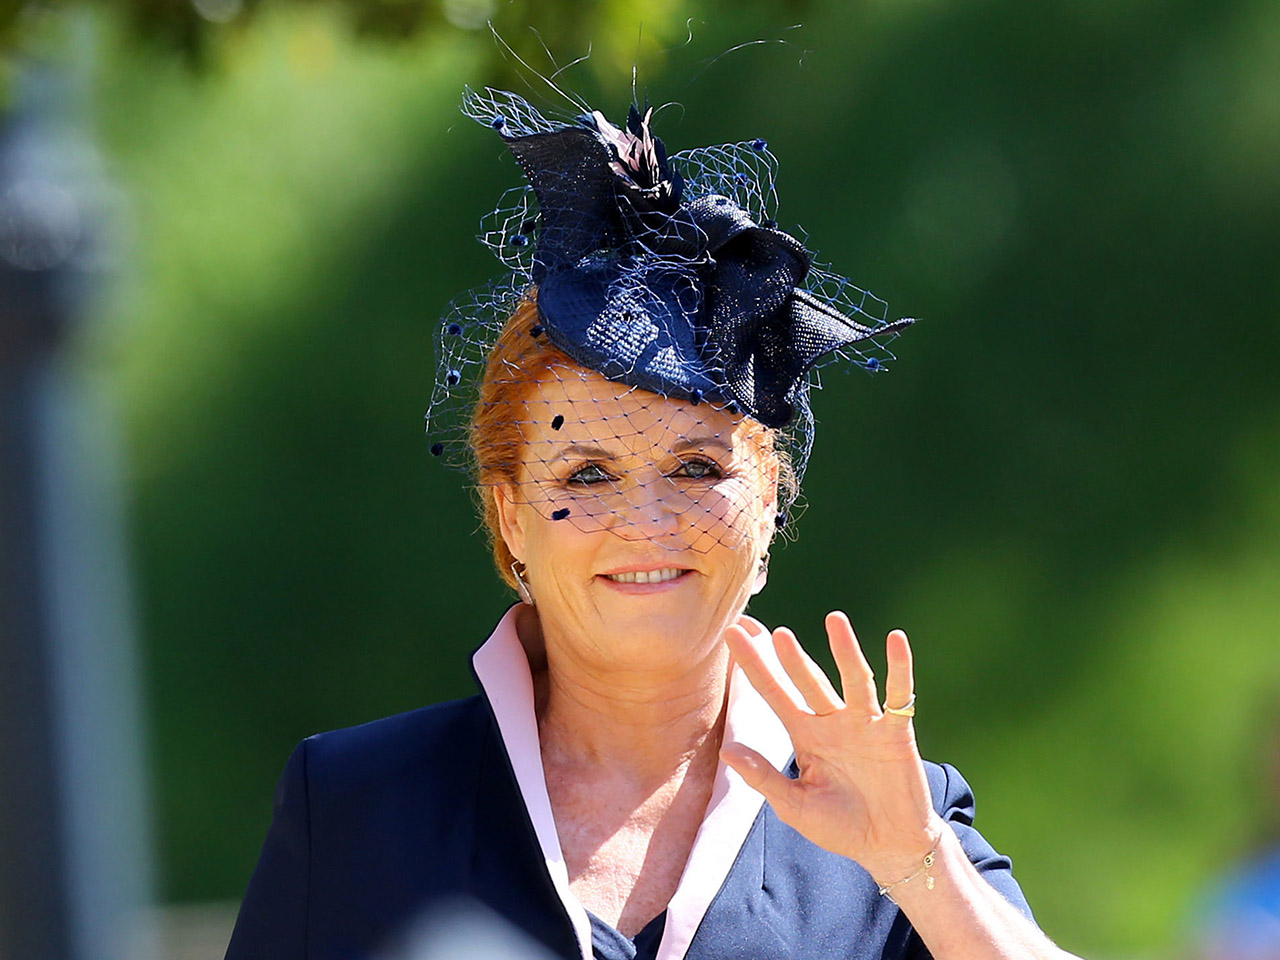 Sarah Duchess of York arrives at St George's Chapel, Windsor Castle before the royal wedding of Prince Harry to Meghan Markle